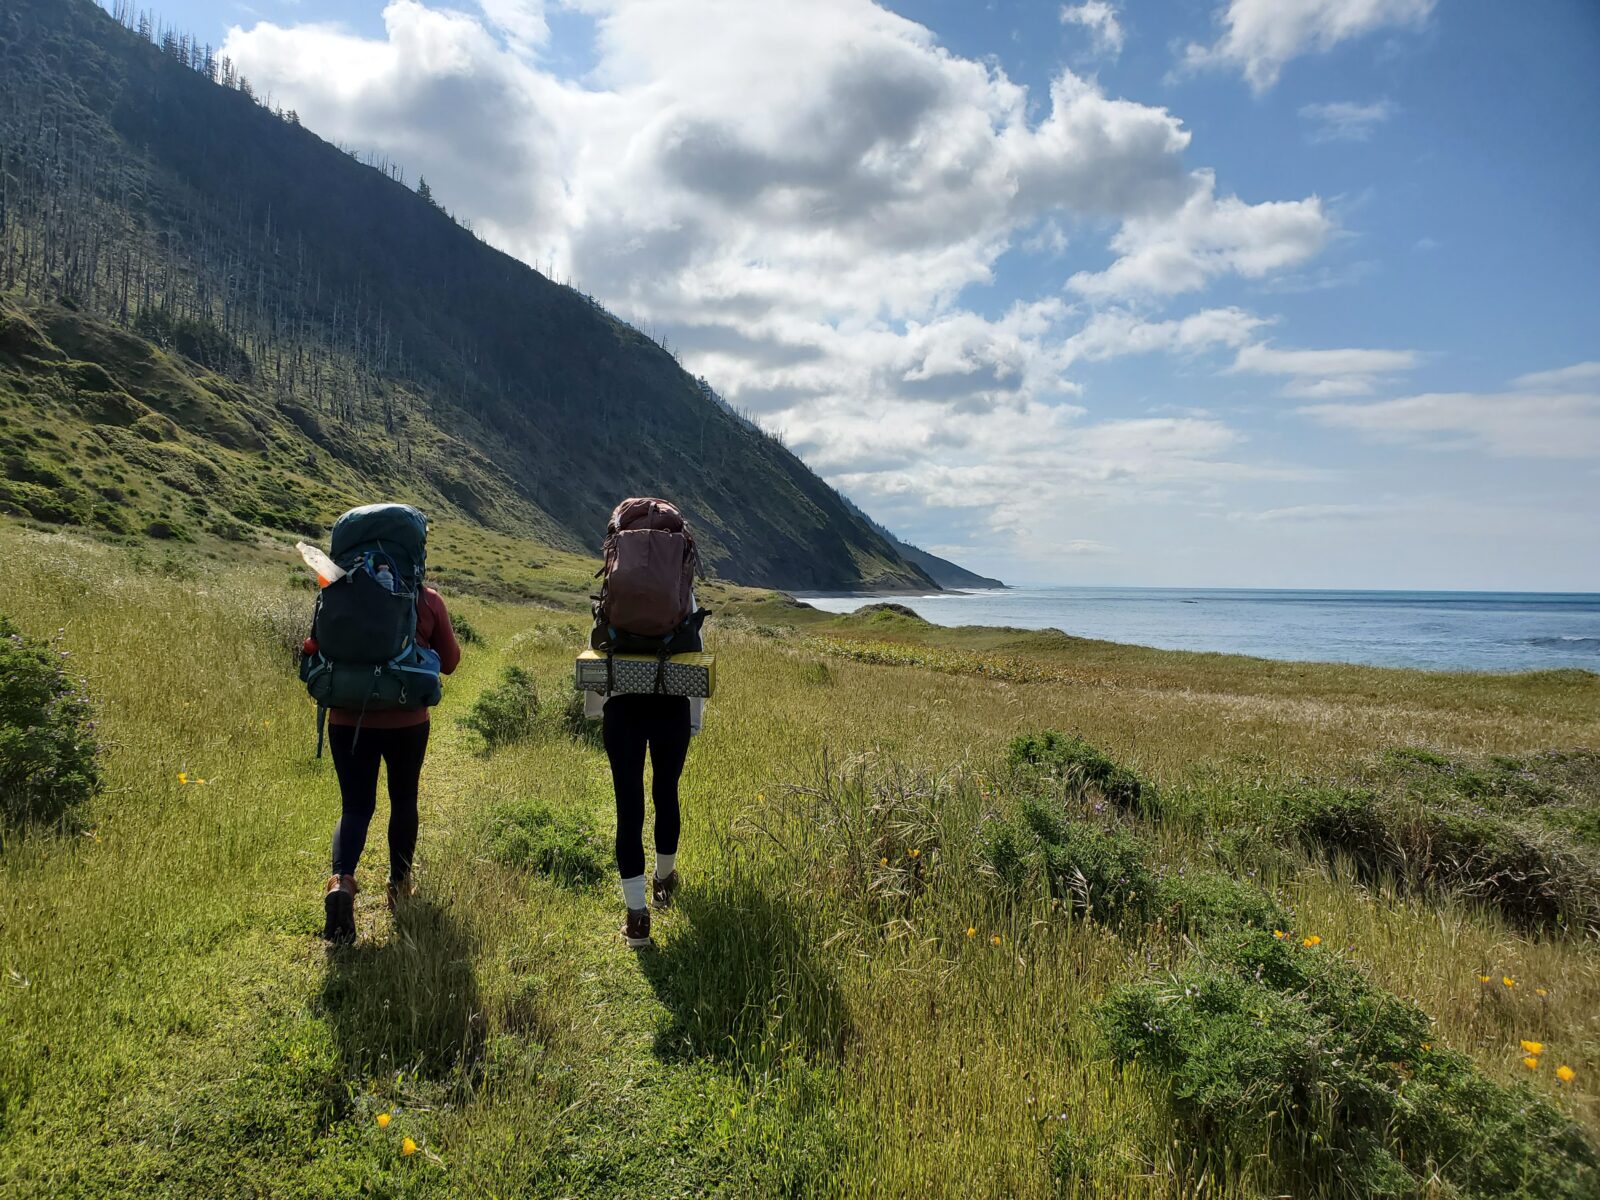 Hikers walking on the trail with green grass surrounding the field and the ocean to their right side